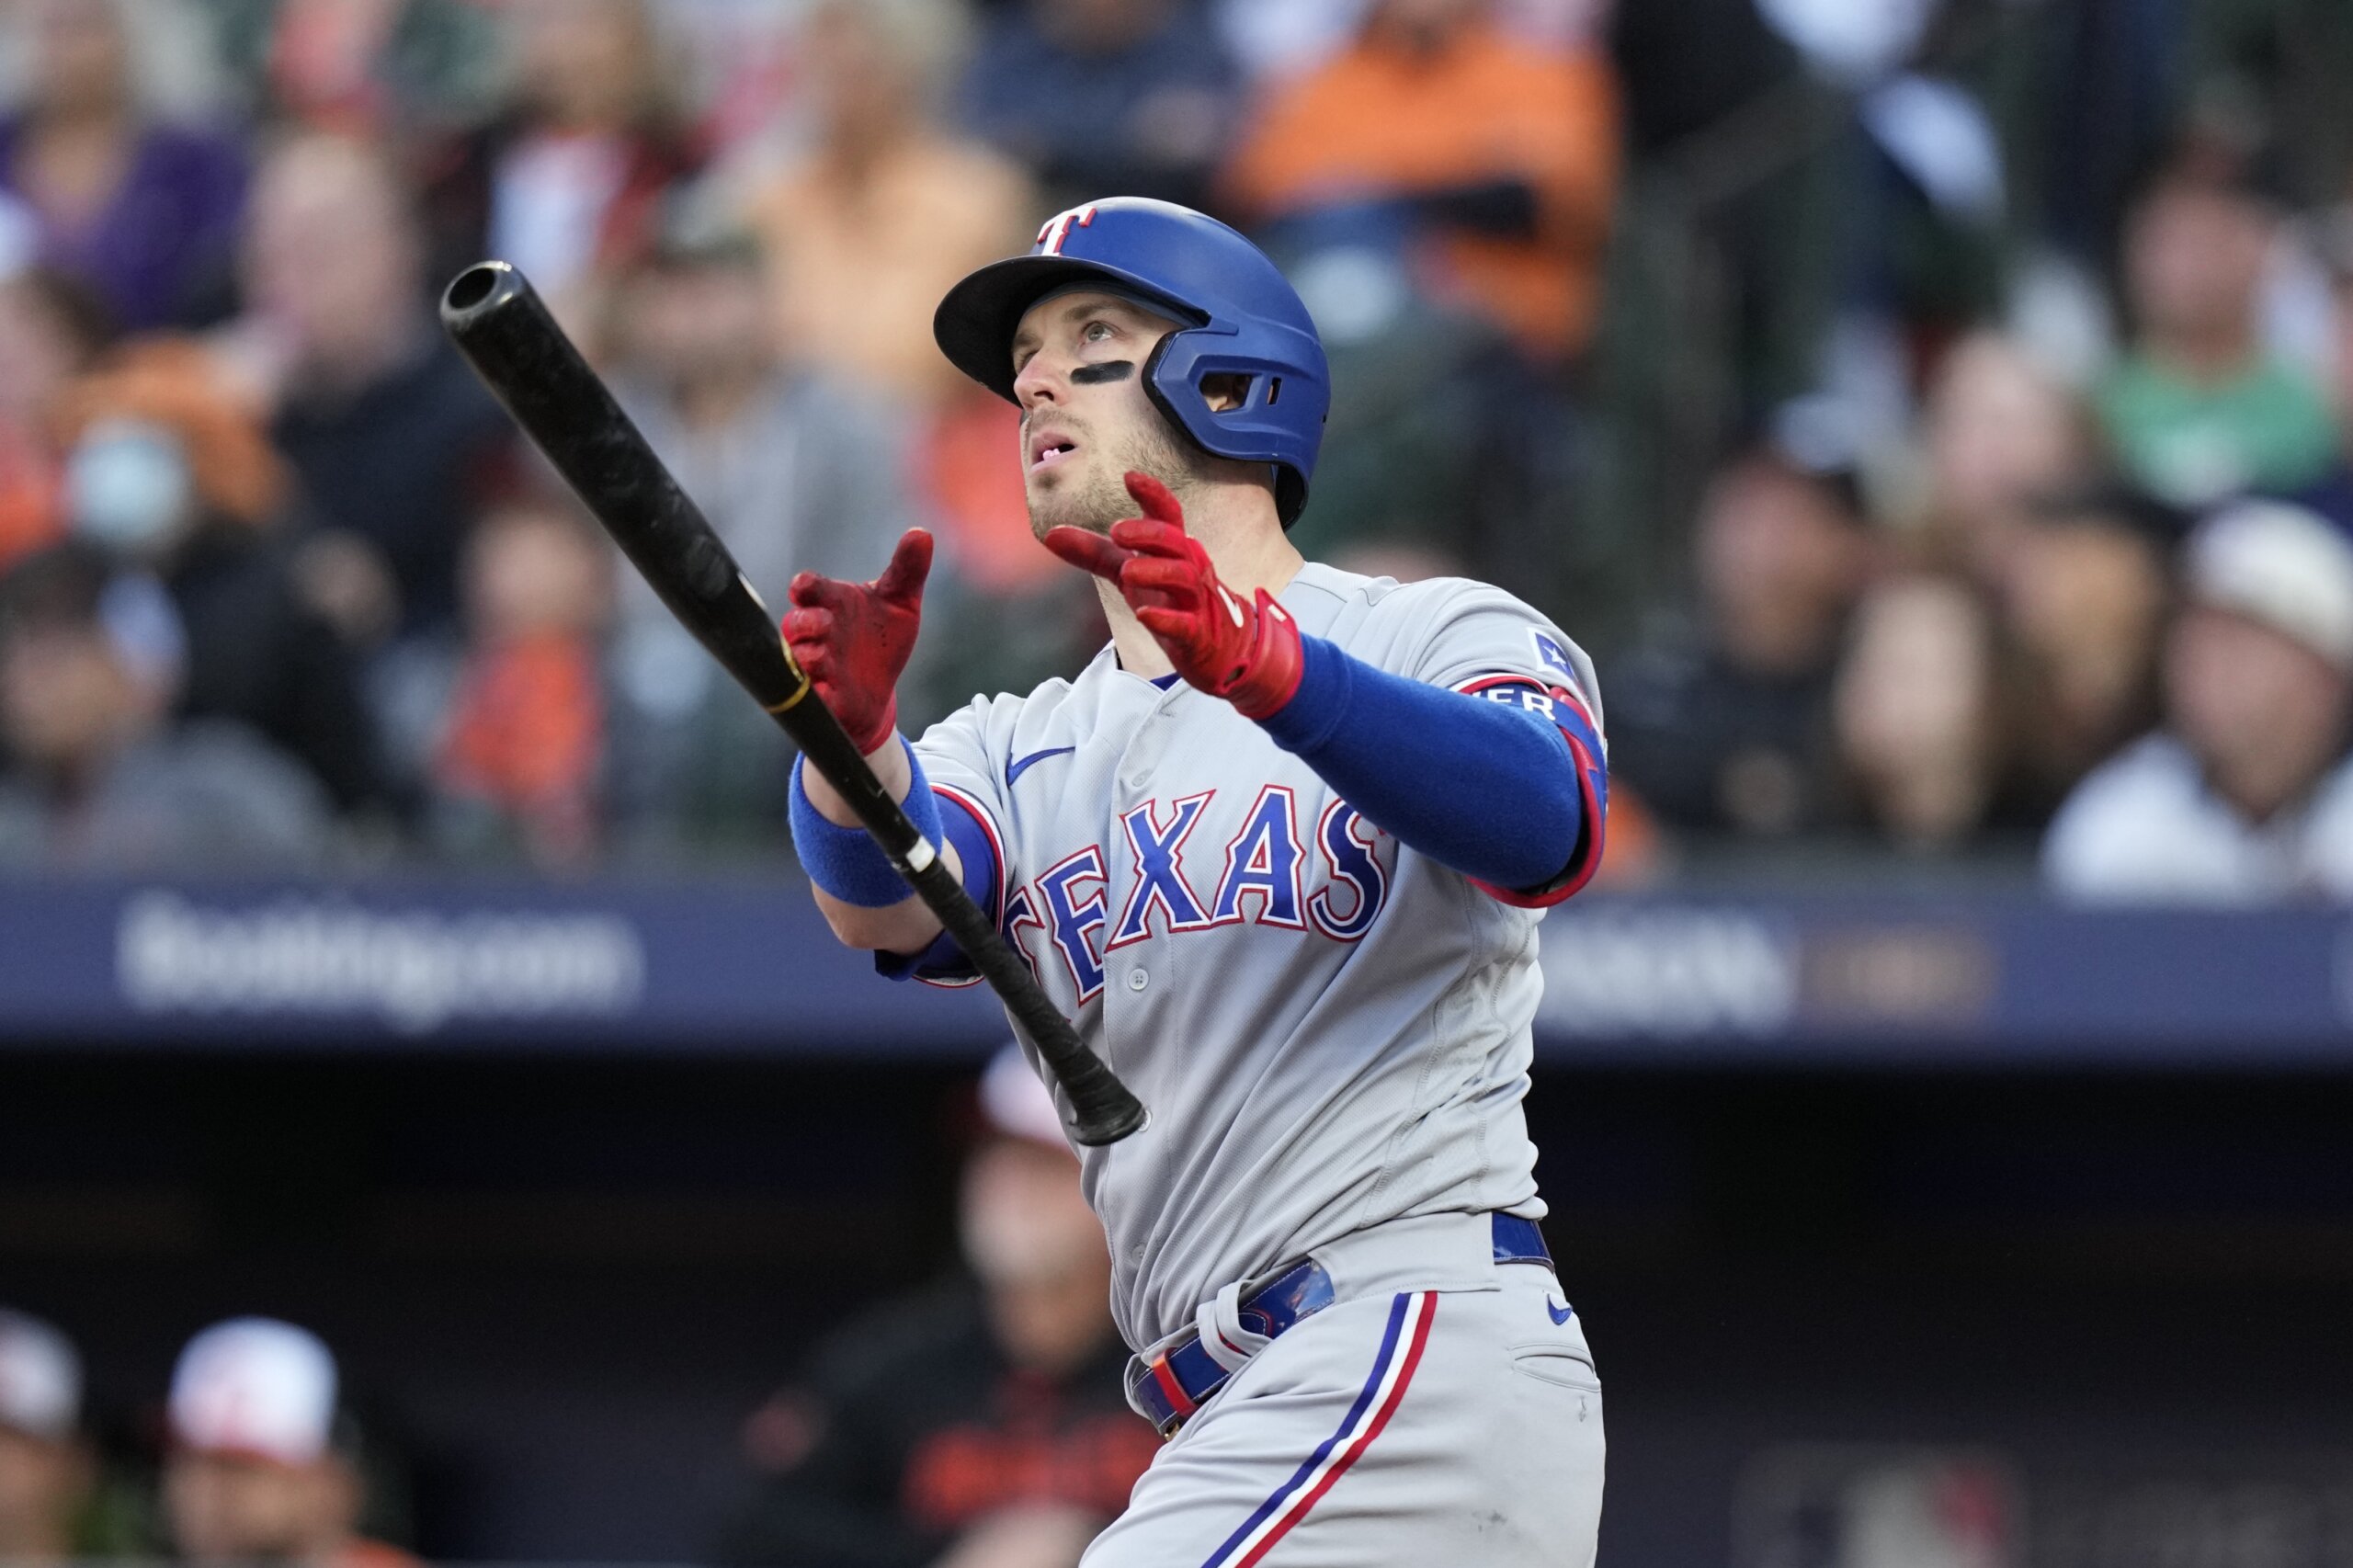 Eovaldi 3-hitter leads Rangers over Yanks 2-0 as Judge sits